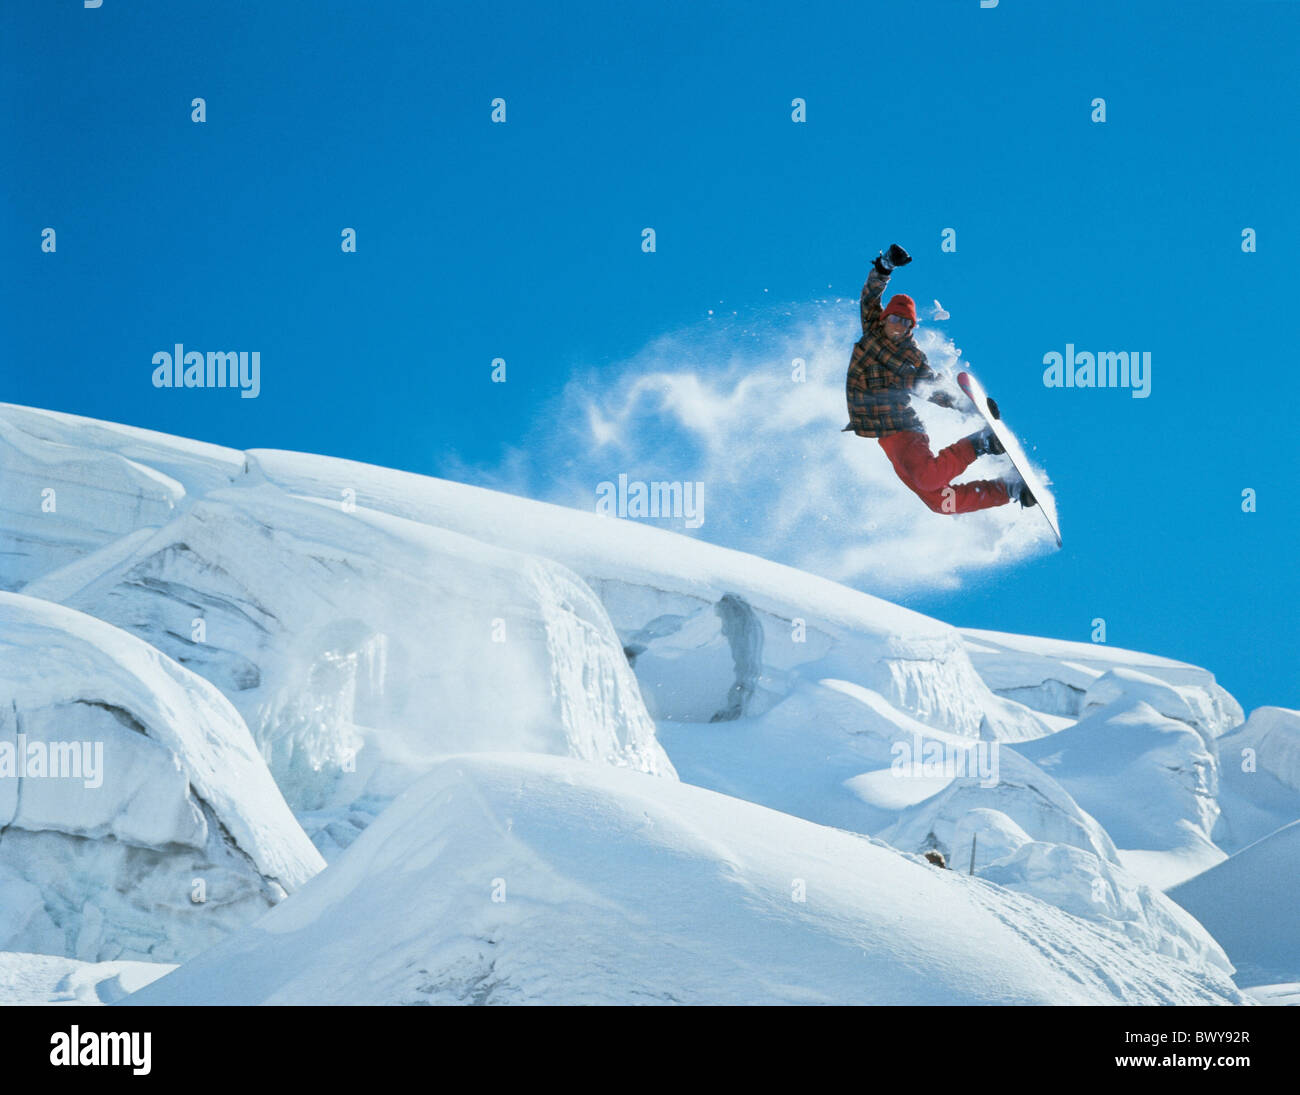 action inclination jump man slope snow snowboard Snowboarder spare time sports winter winter sports Swit Stock Photo